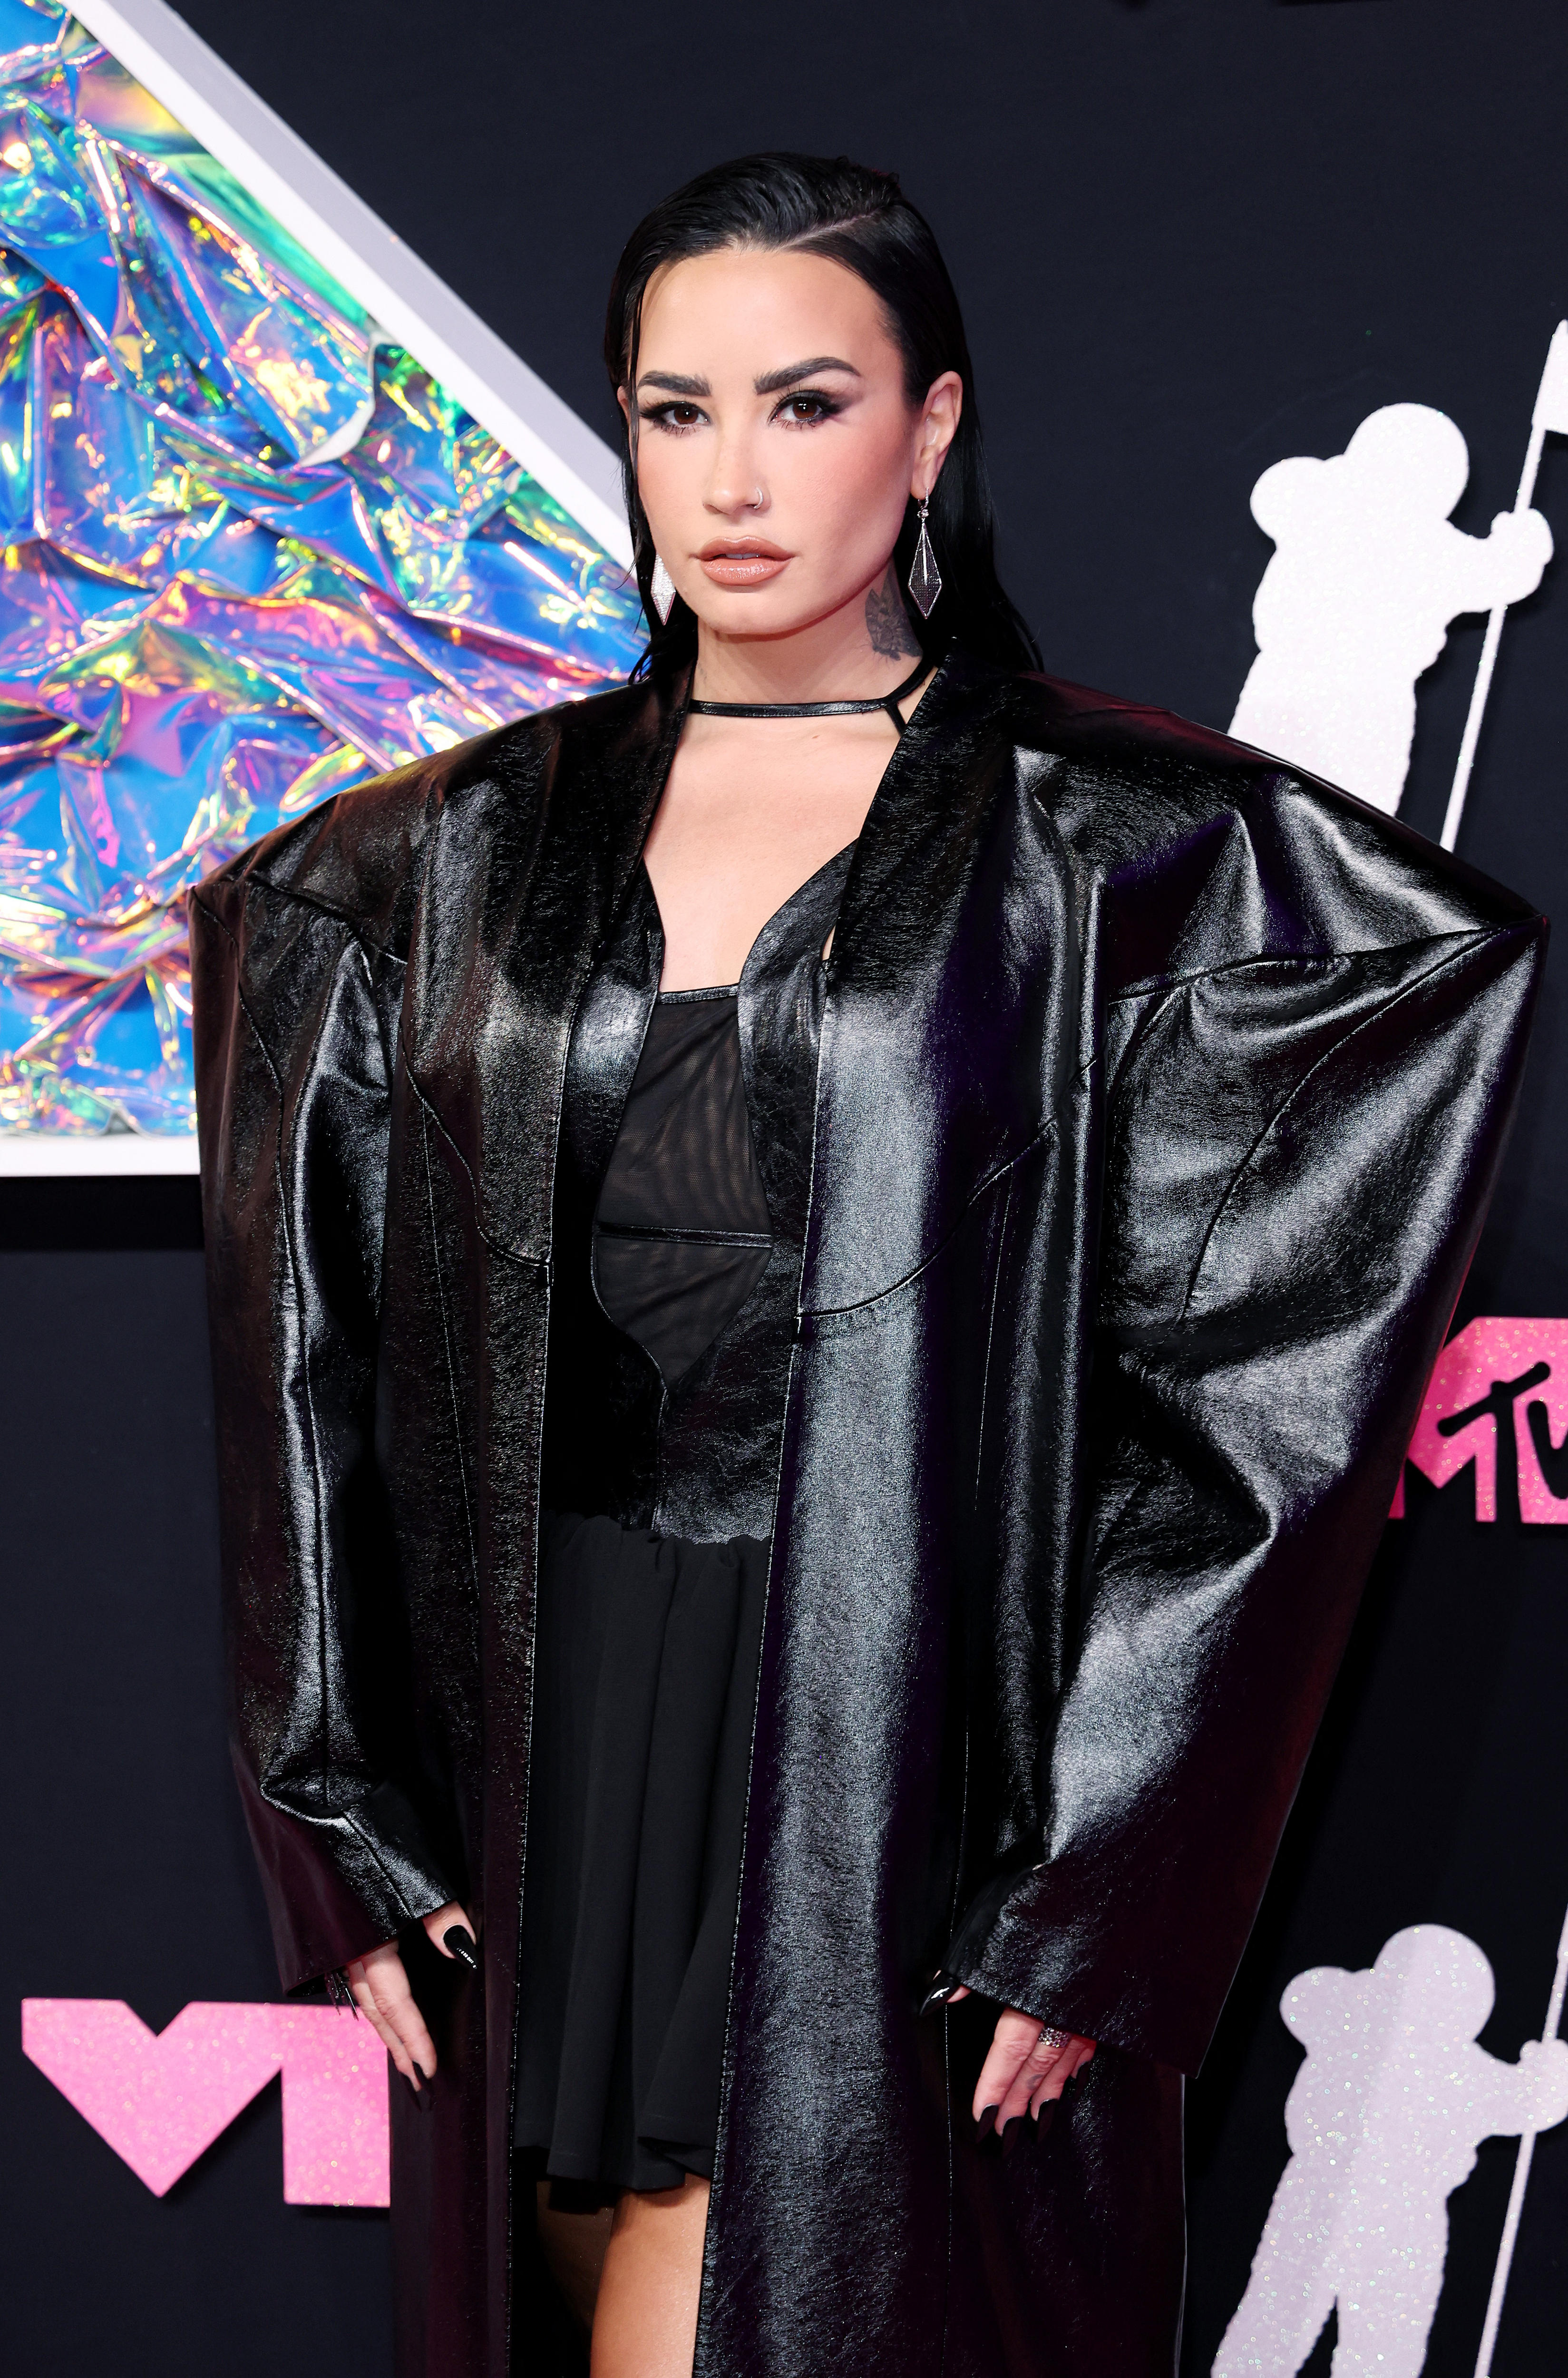 Demi Lovato wearing a black dress with big shoulder pads.